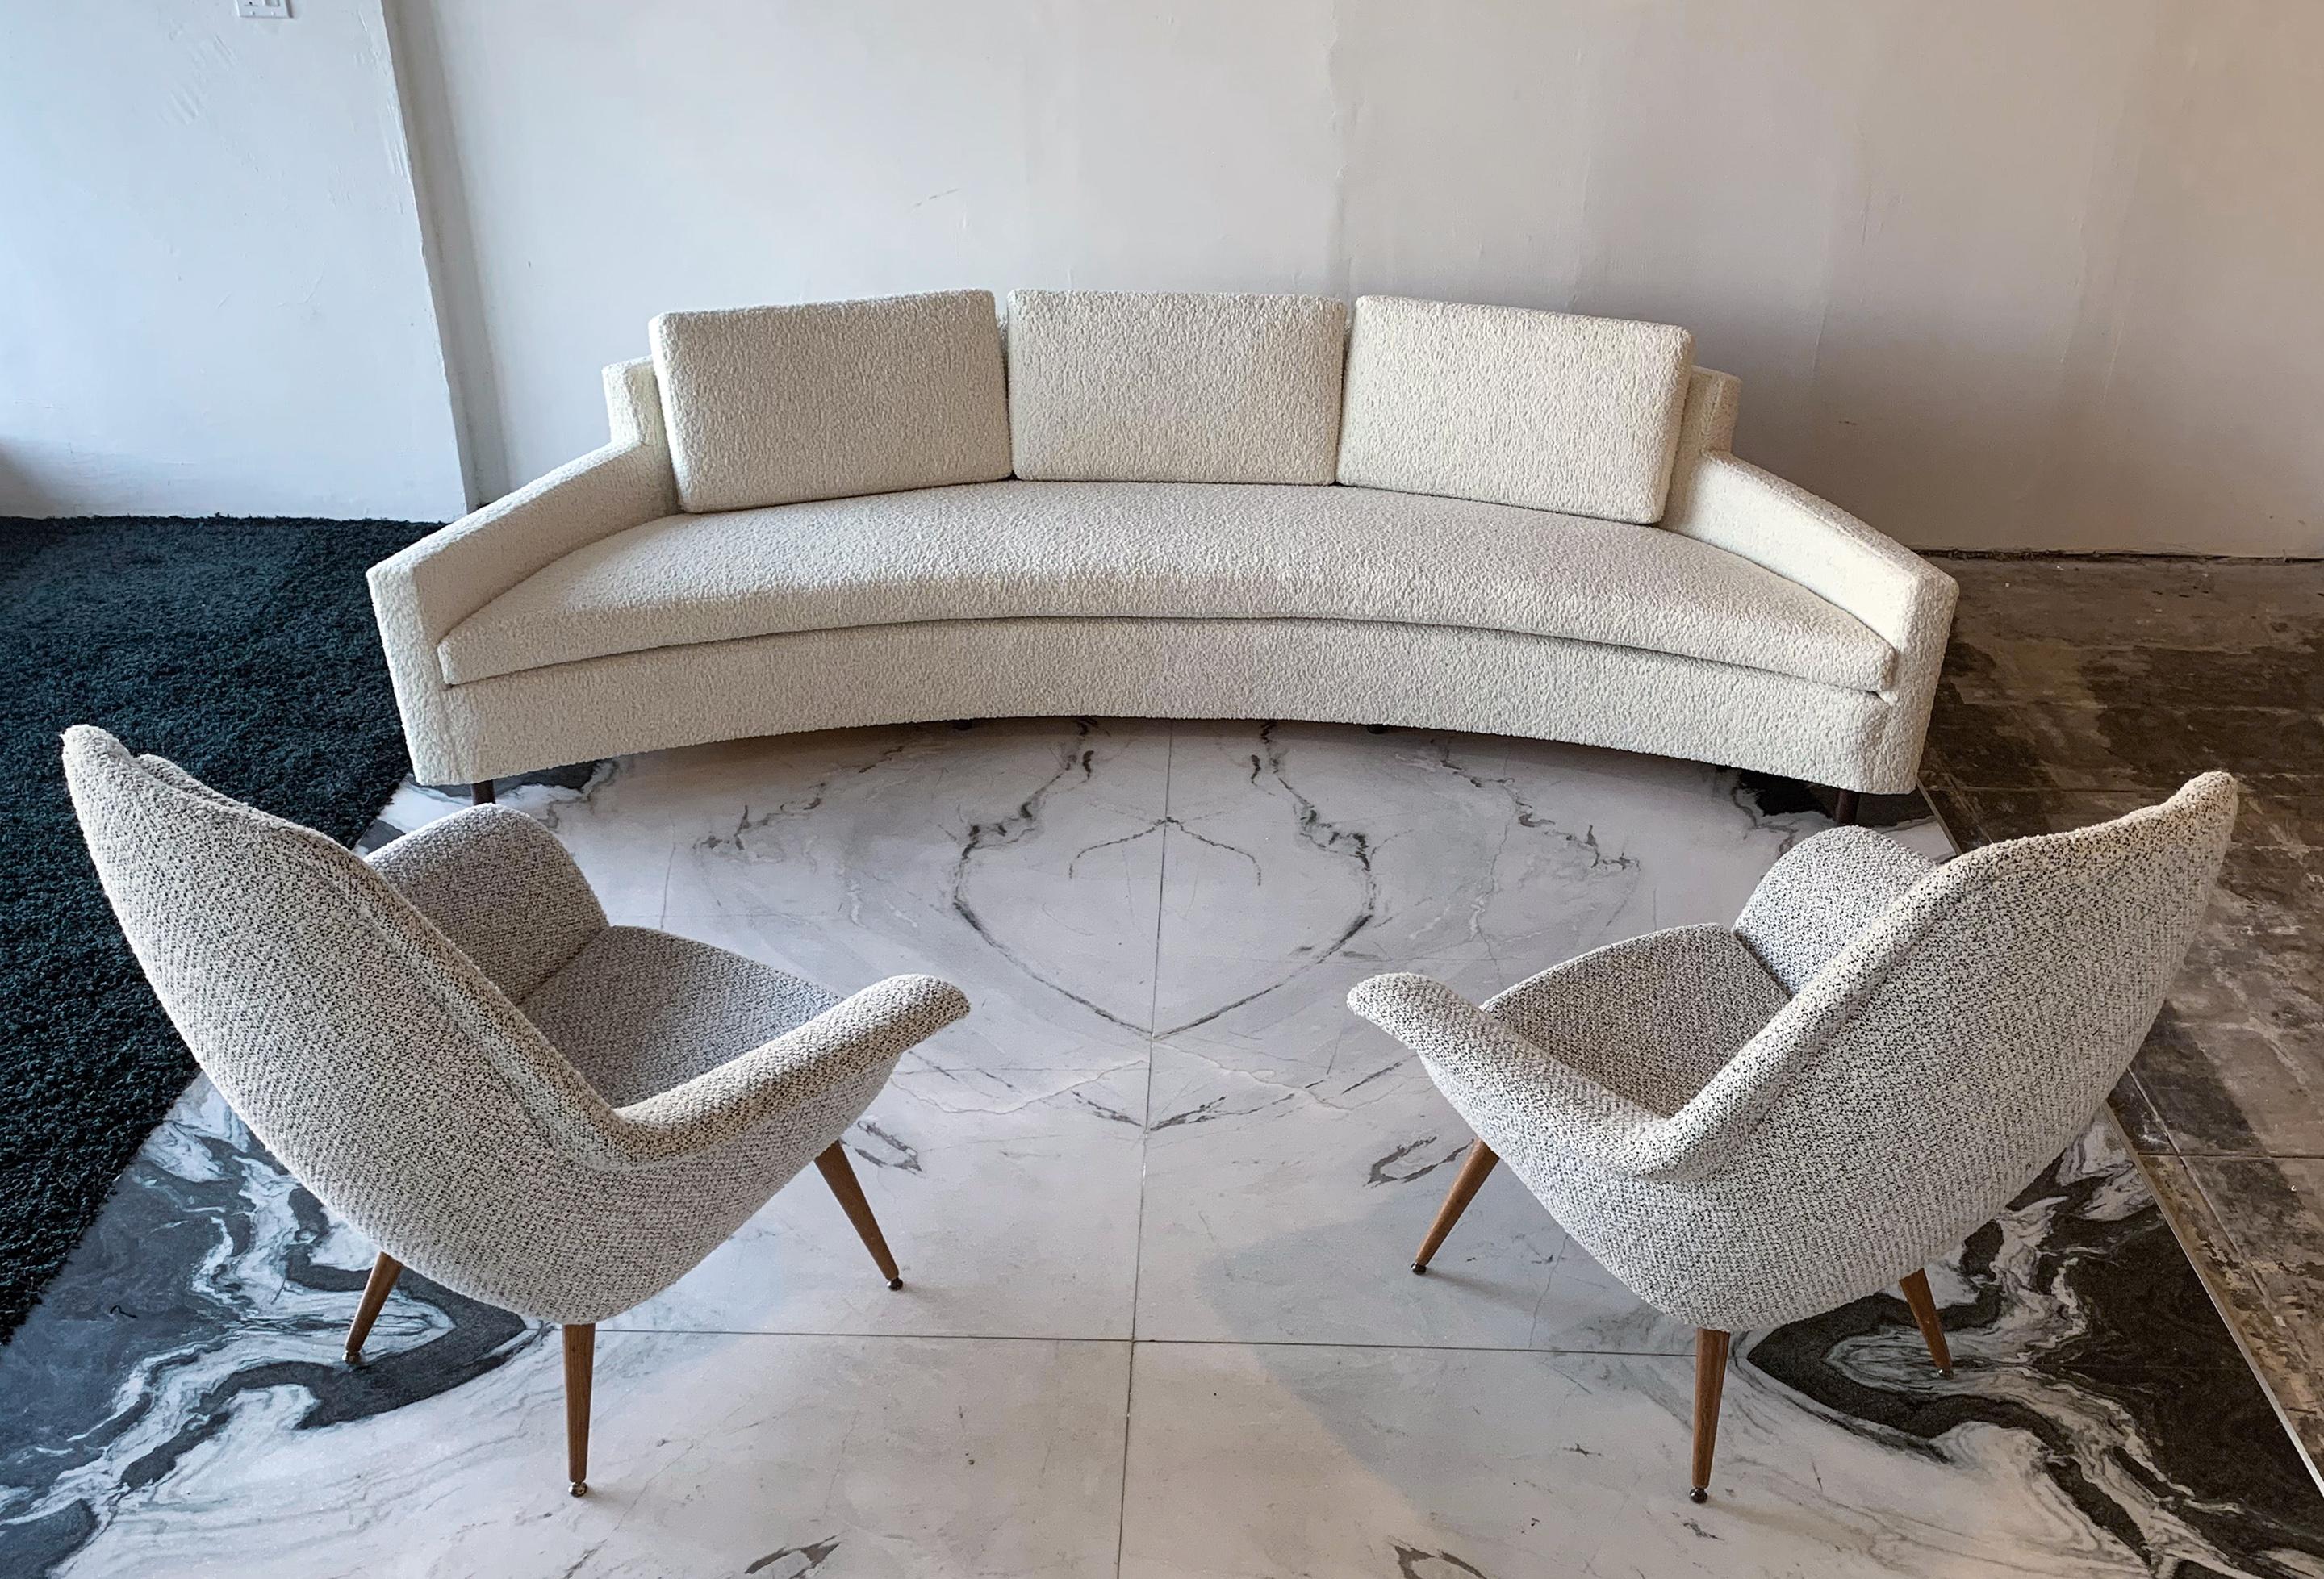 This sofa is simply stunning. A rare 1960s Harvey Probber curved sofa that has been expertly reupholstered in sumptuous heavy bouclé, this curved sofa is truly the pinnacle of clean, modern design. The sofa has a crescent / curved body with walnut